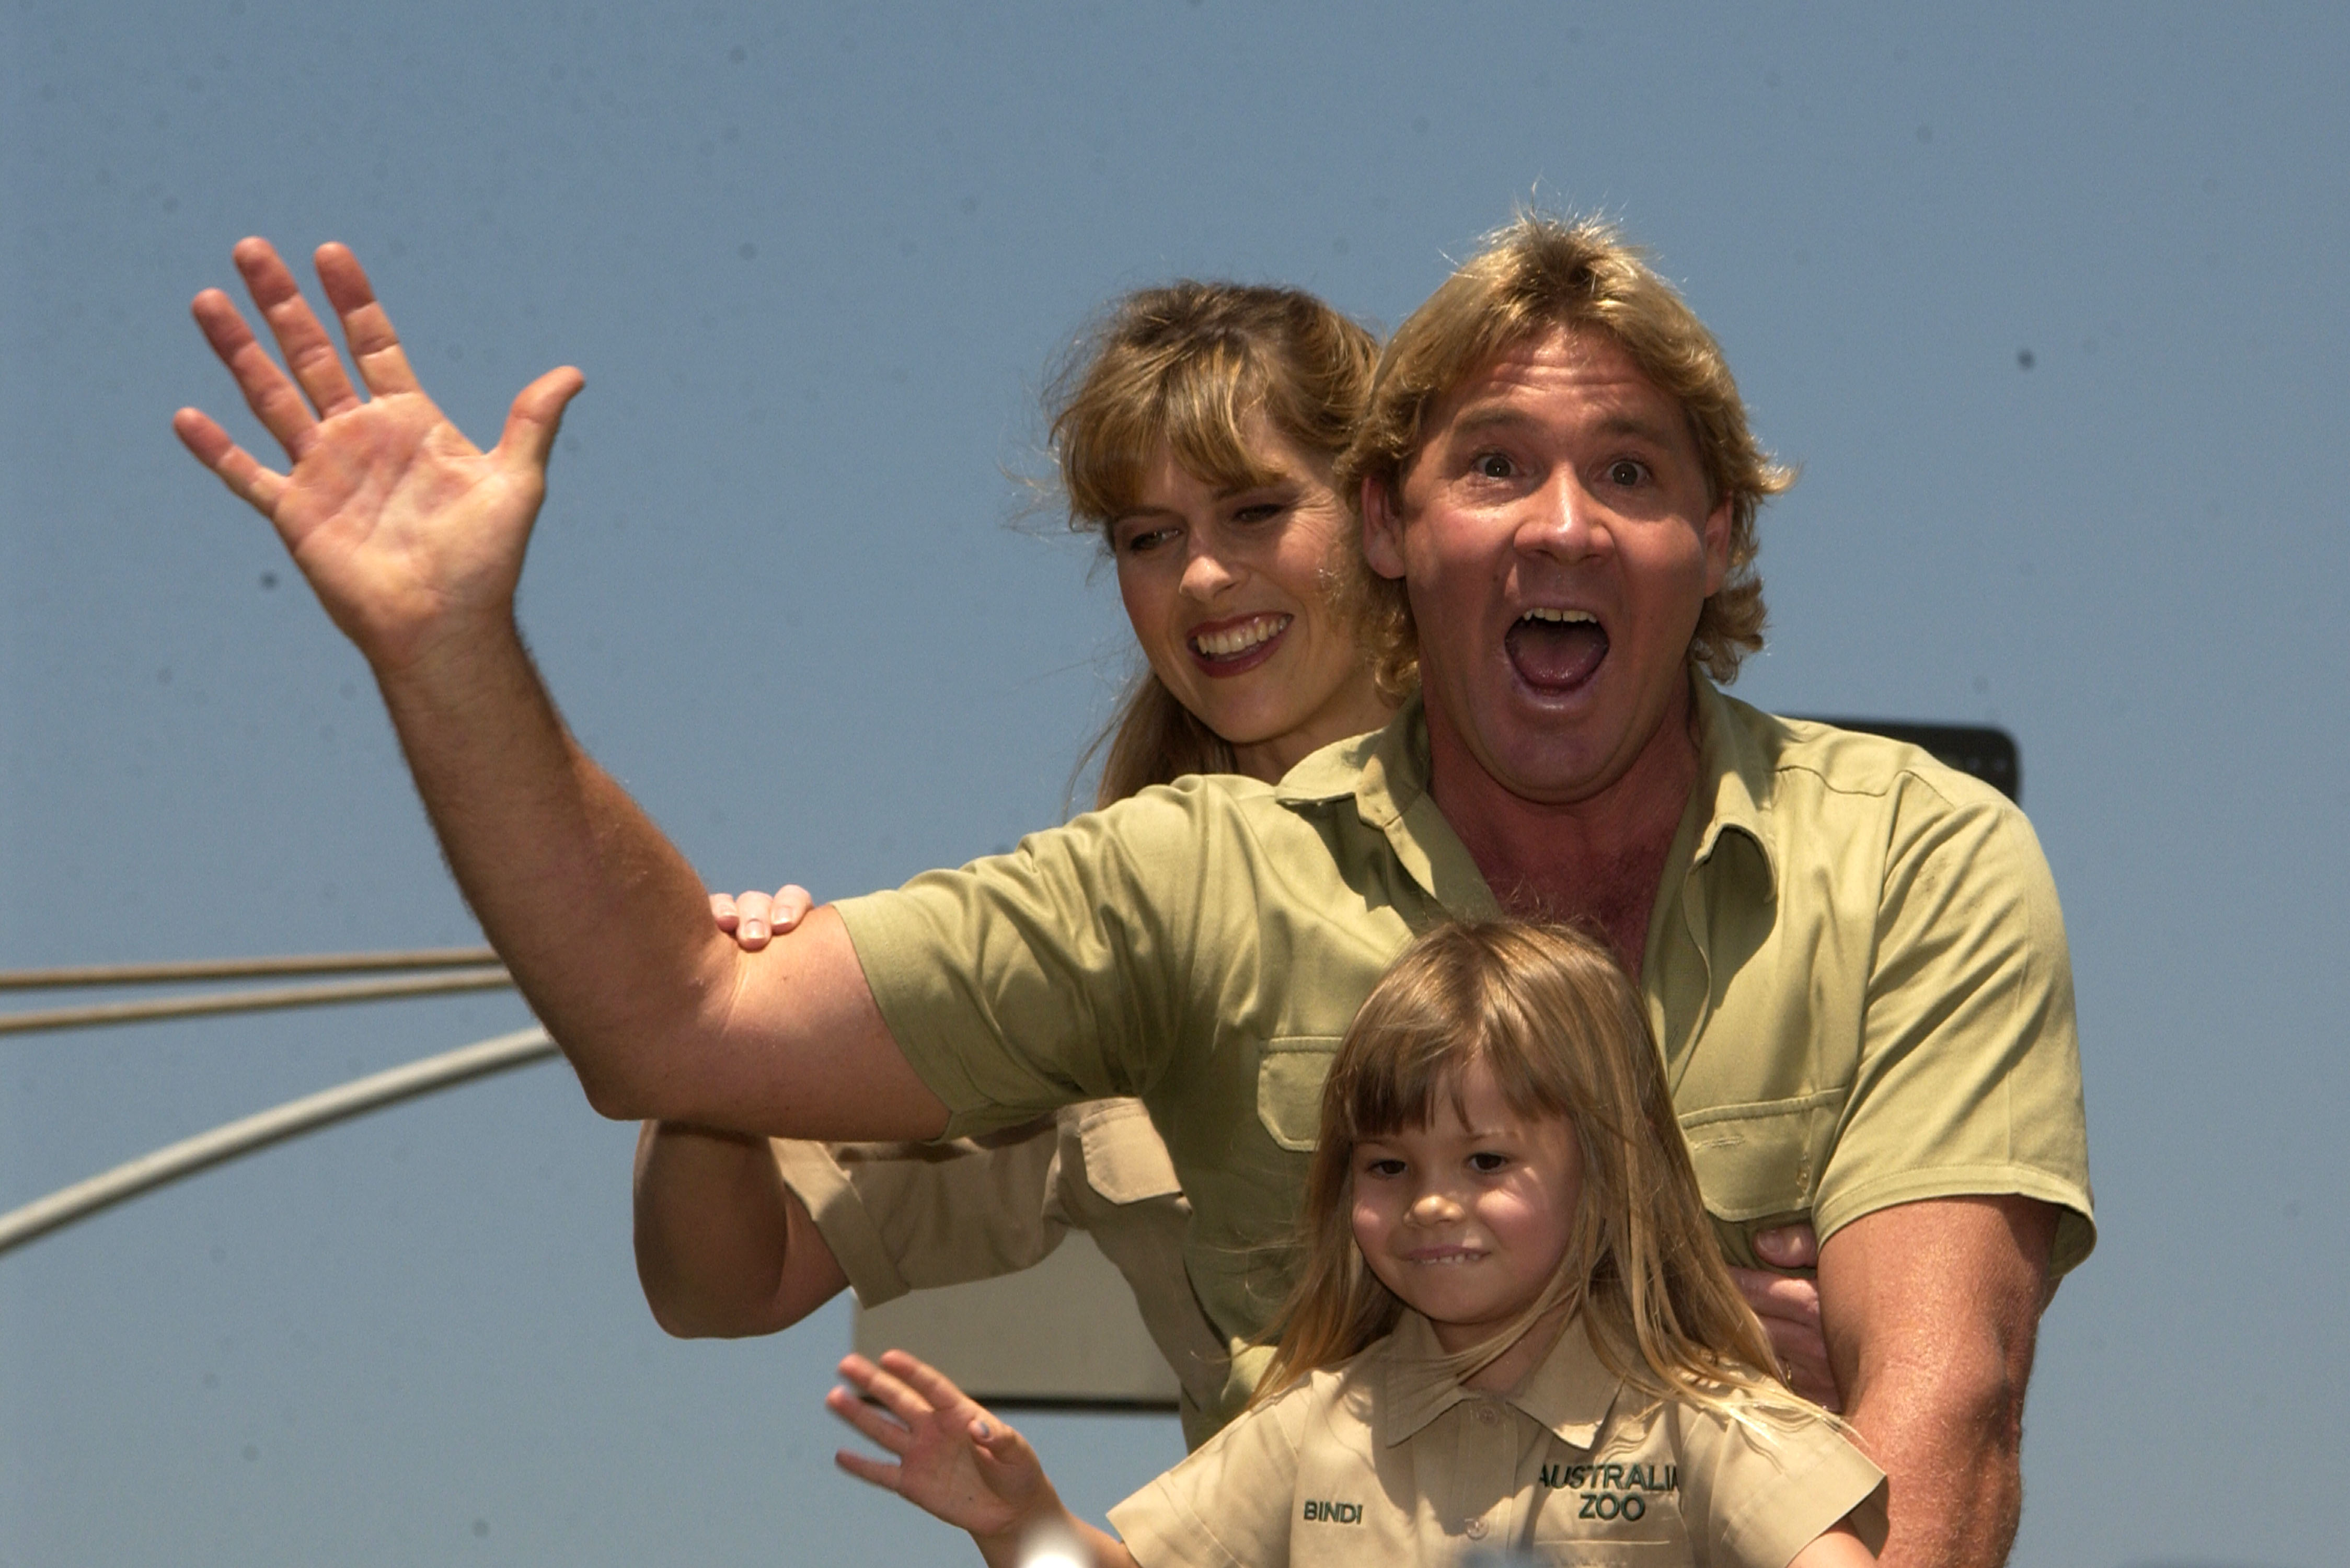 Steve Irwin with wife Terri Irwin and daughter Bindi Irwin at the "The Crocodile Hunter: Collision Course" premiere on June 29, 2002 | Source: Getty Images